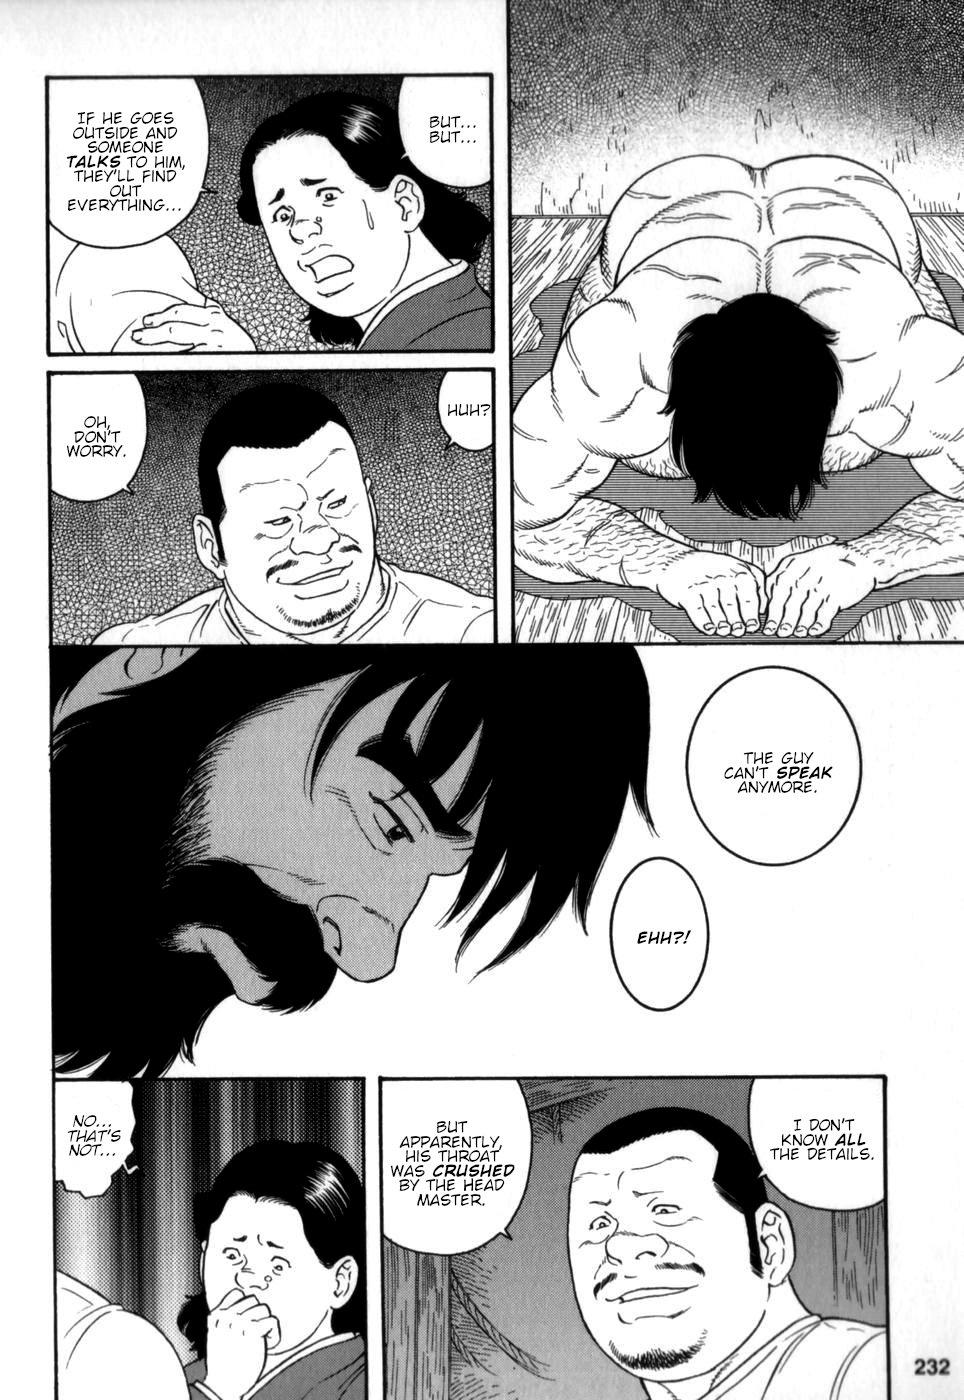 Latin Gedou no Ie Chuukan | House of Brutes Vol. 2 Ch. 8 Gay Natural - Page 2